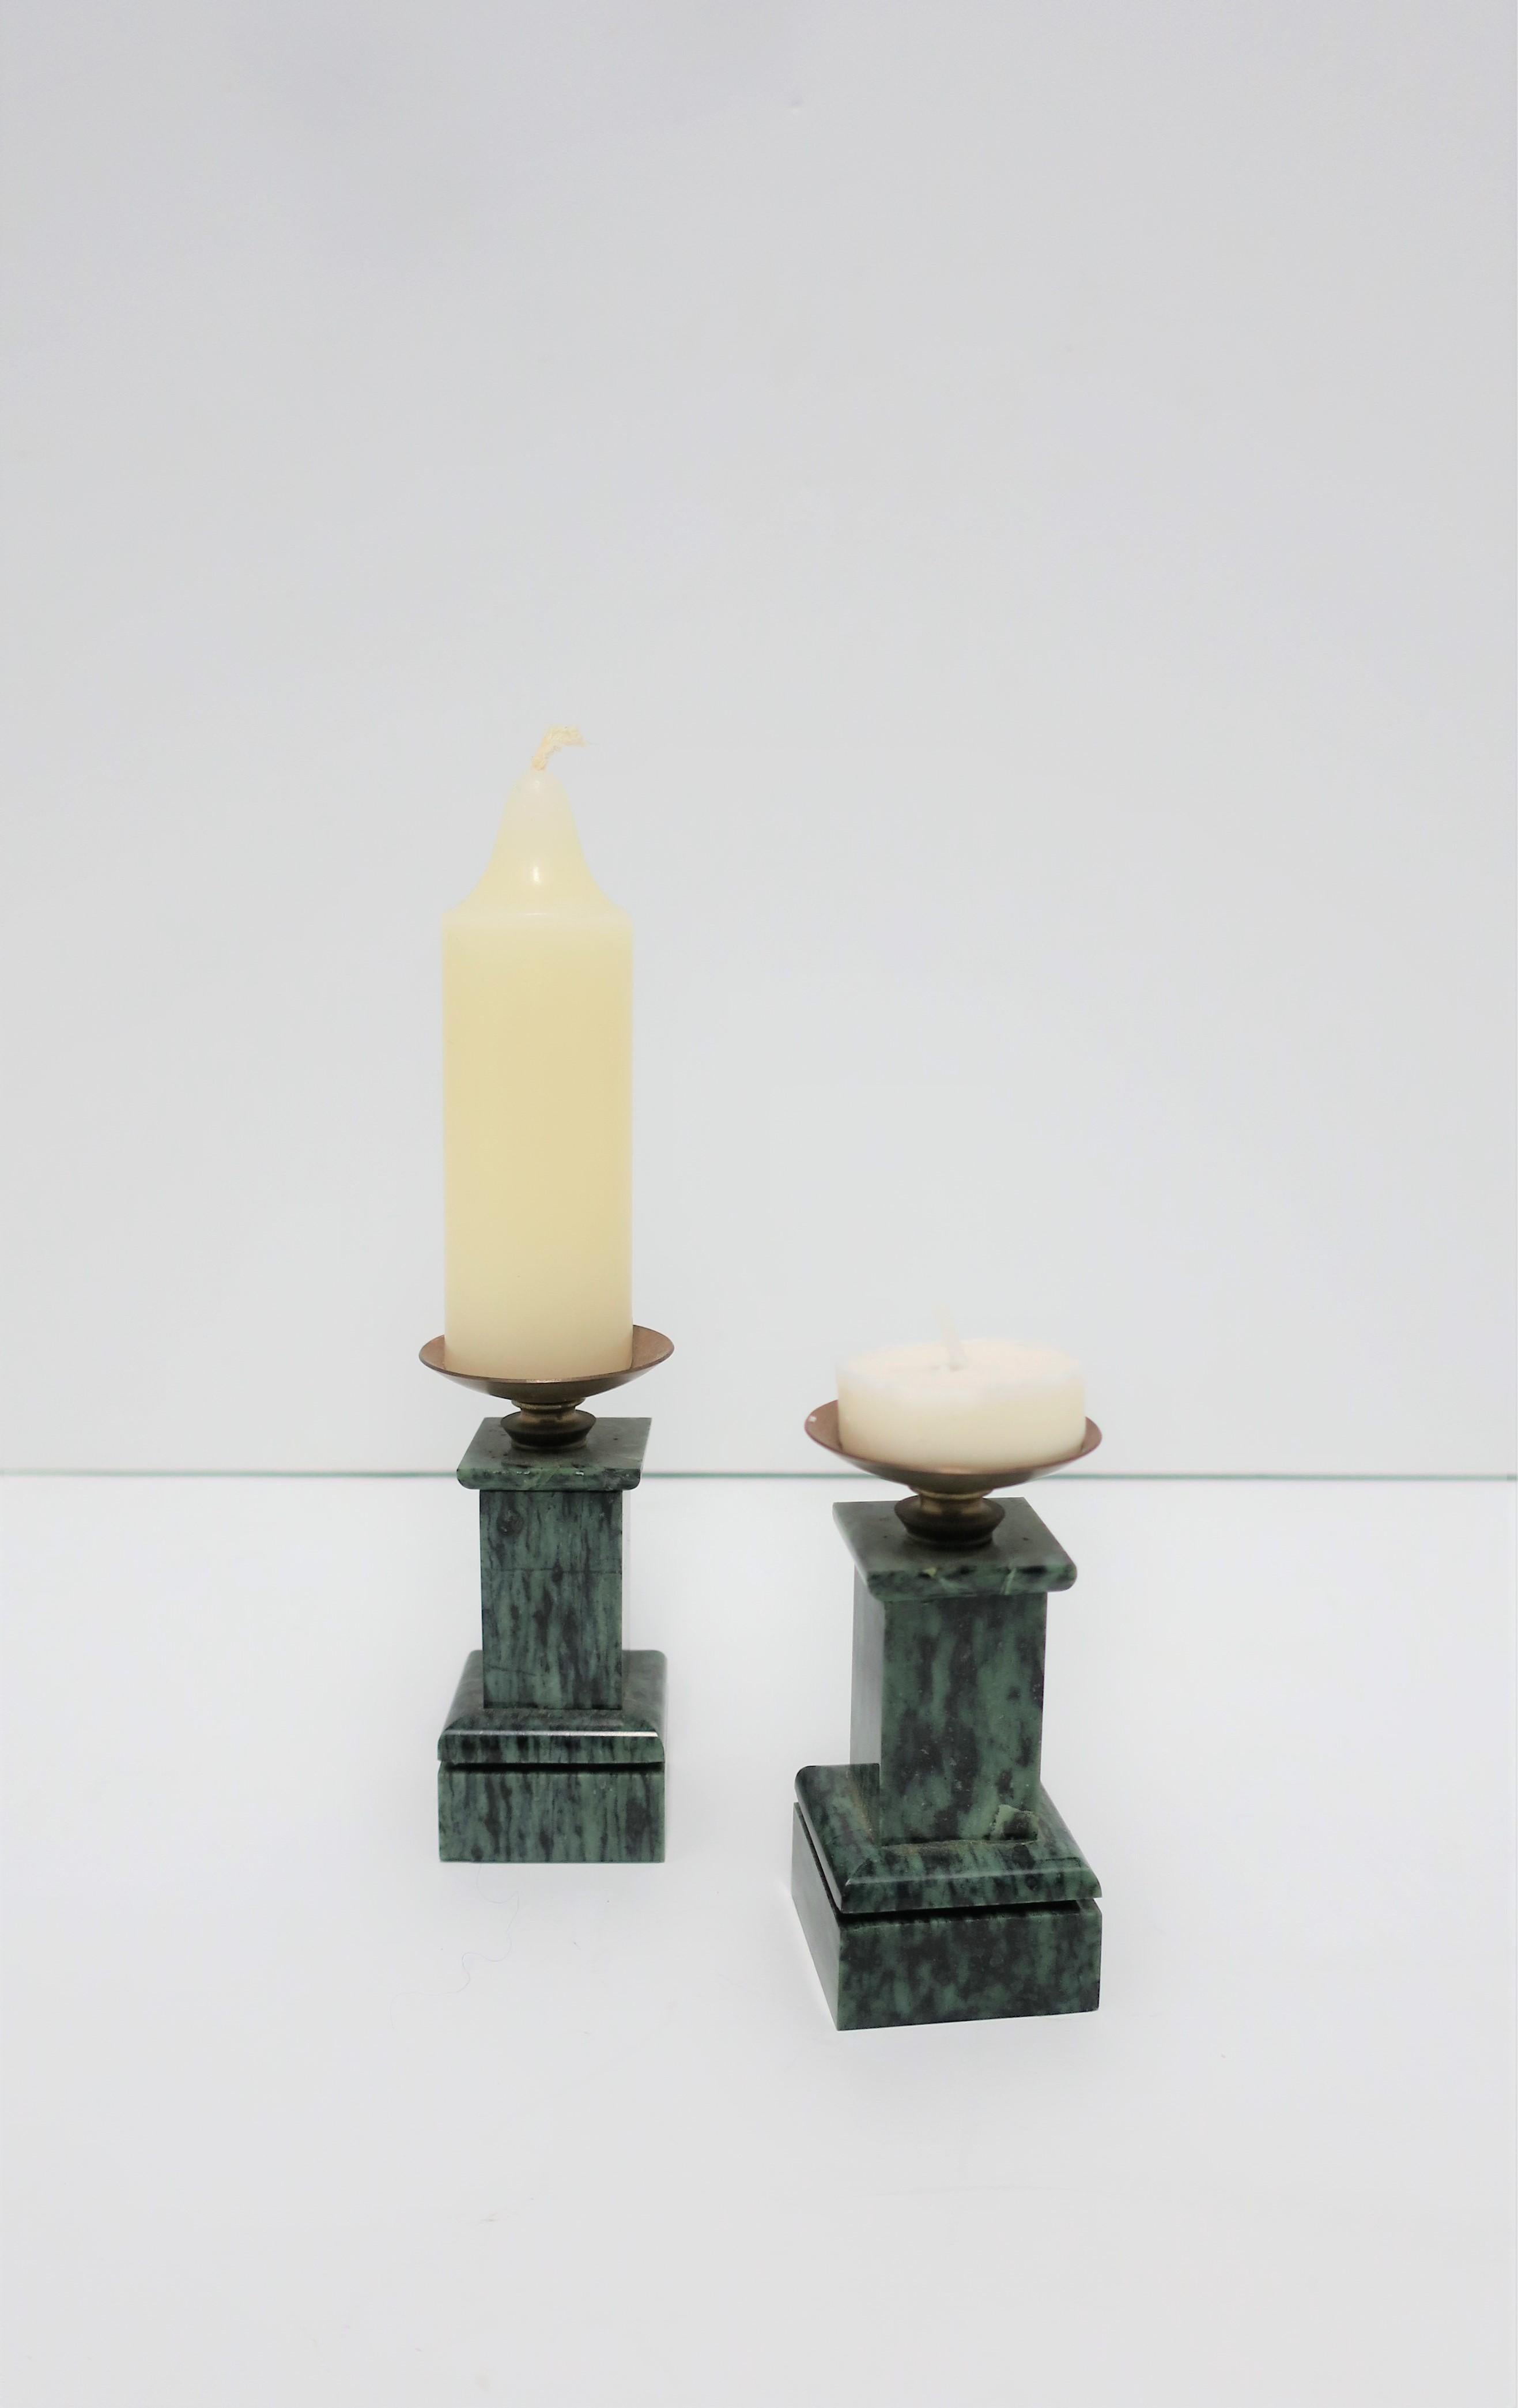 European Neoclassical Column Dark Green Marble and Brass Candlesticks Holders, Pair For Sale